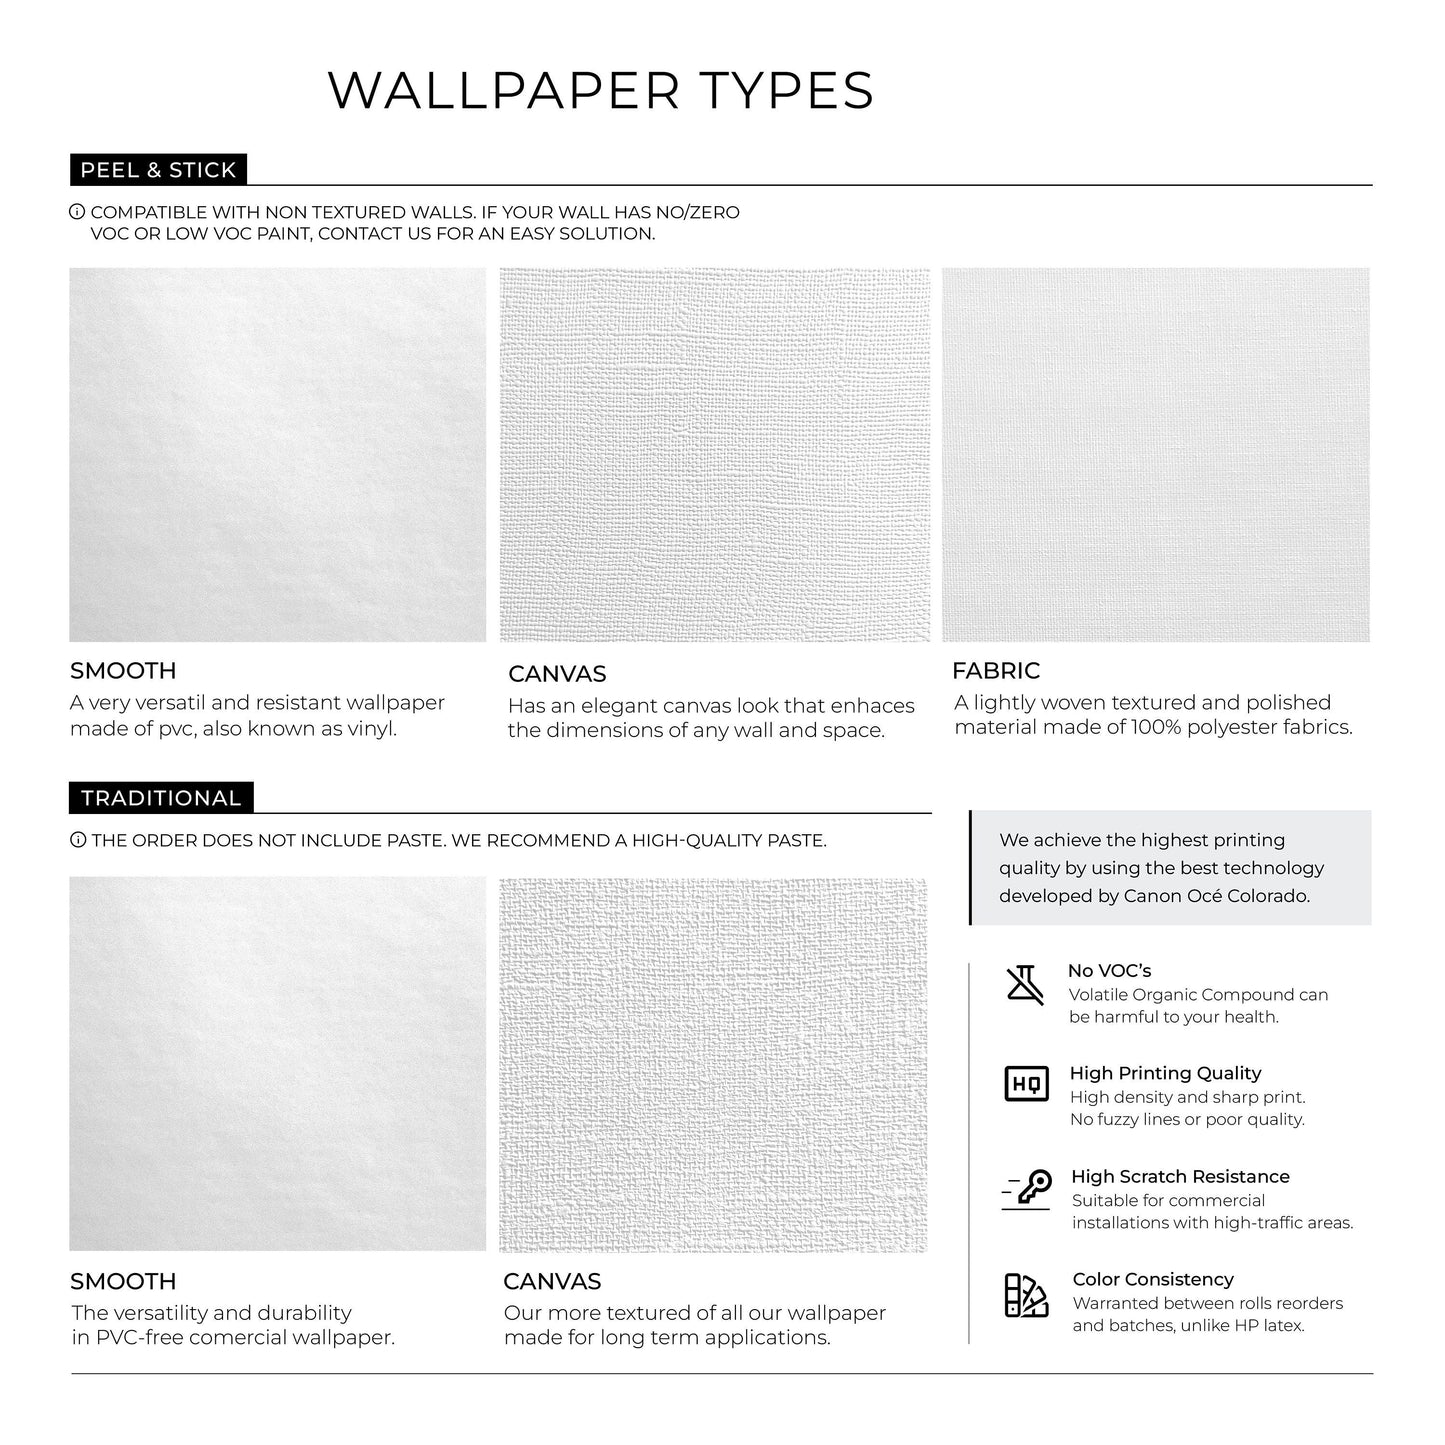 Black and White Vintage Peony Wallpaper Peel and Stick and Traditional Wallpaper - A171